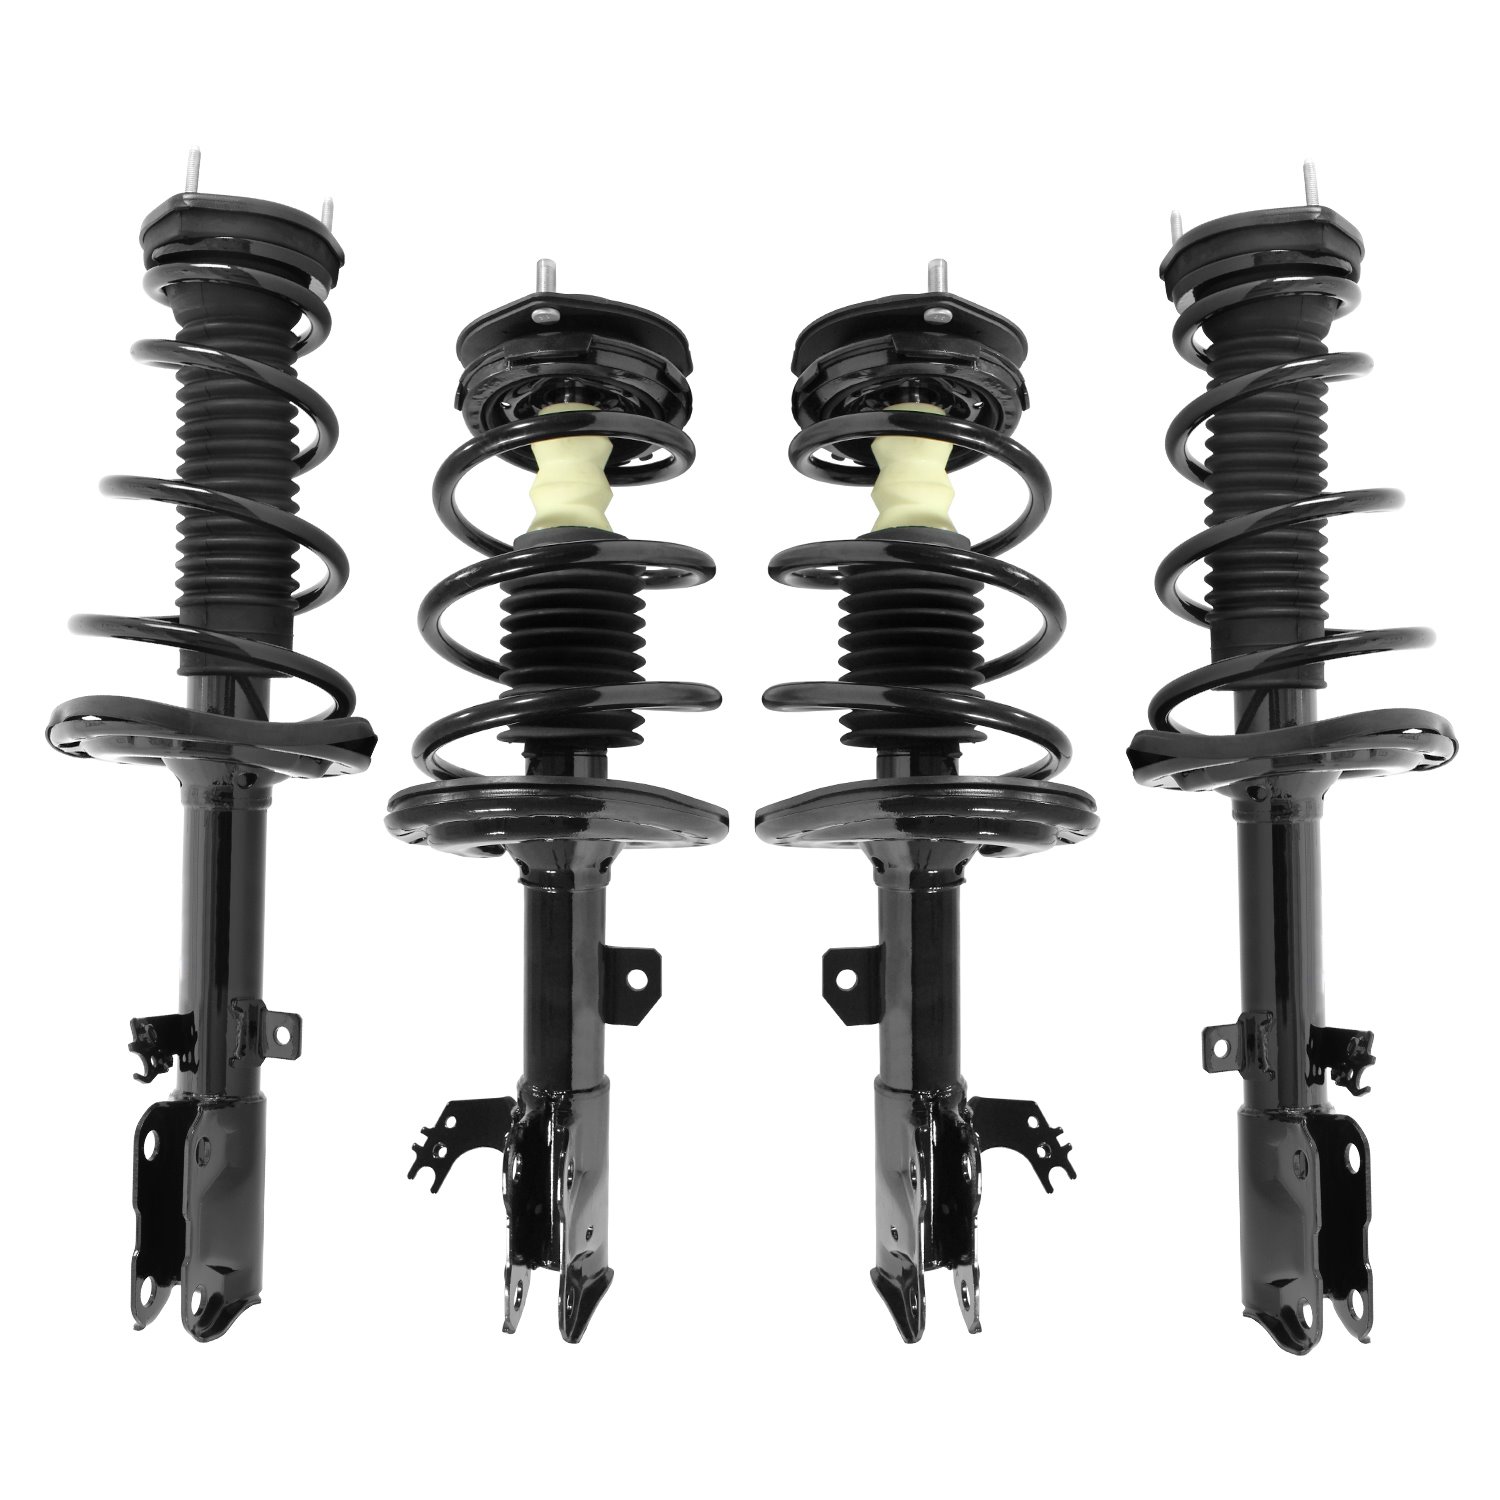 4-11693-15073-001 Front & Rear Suspension Strut & Coil Spring Assembly Kit Fits Select Toyota Camry